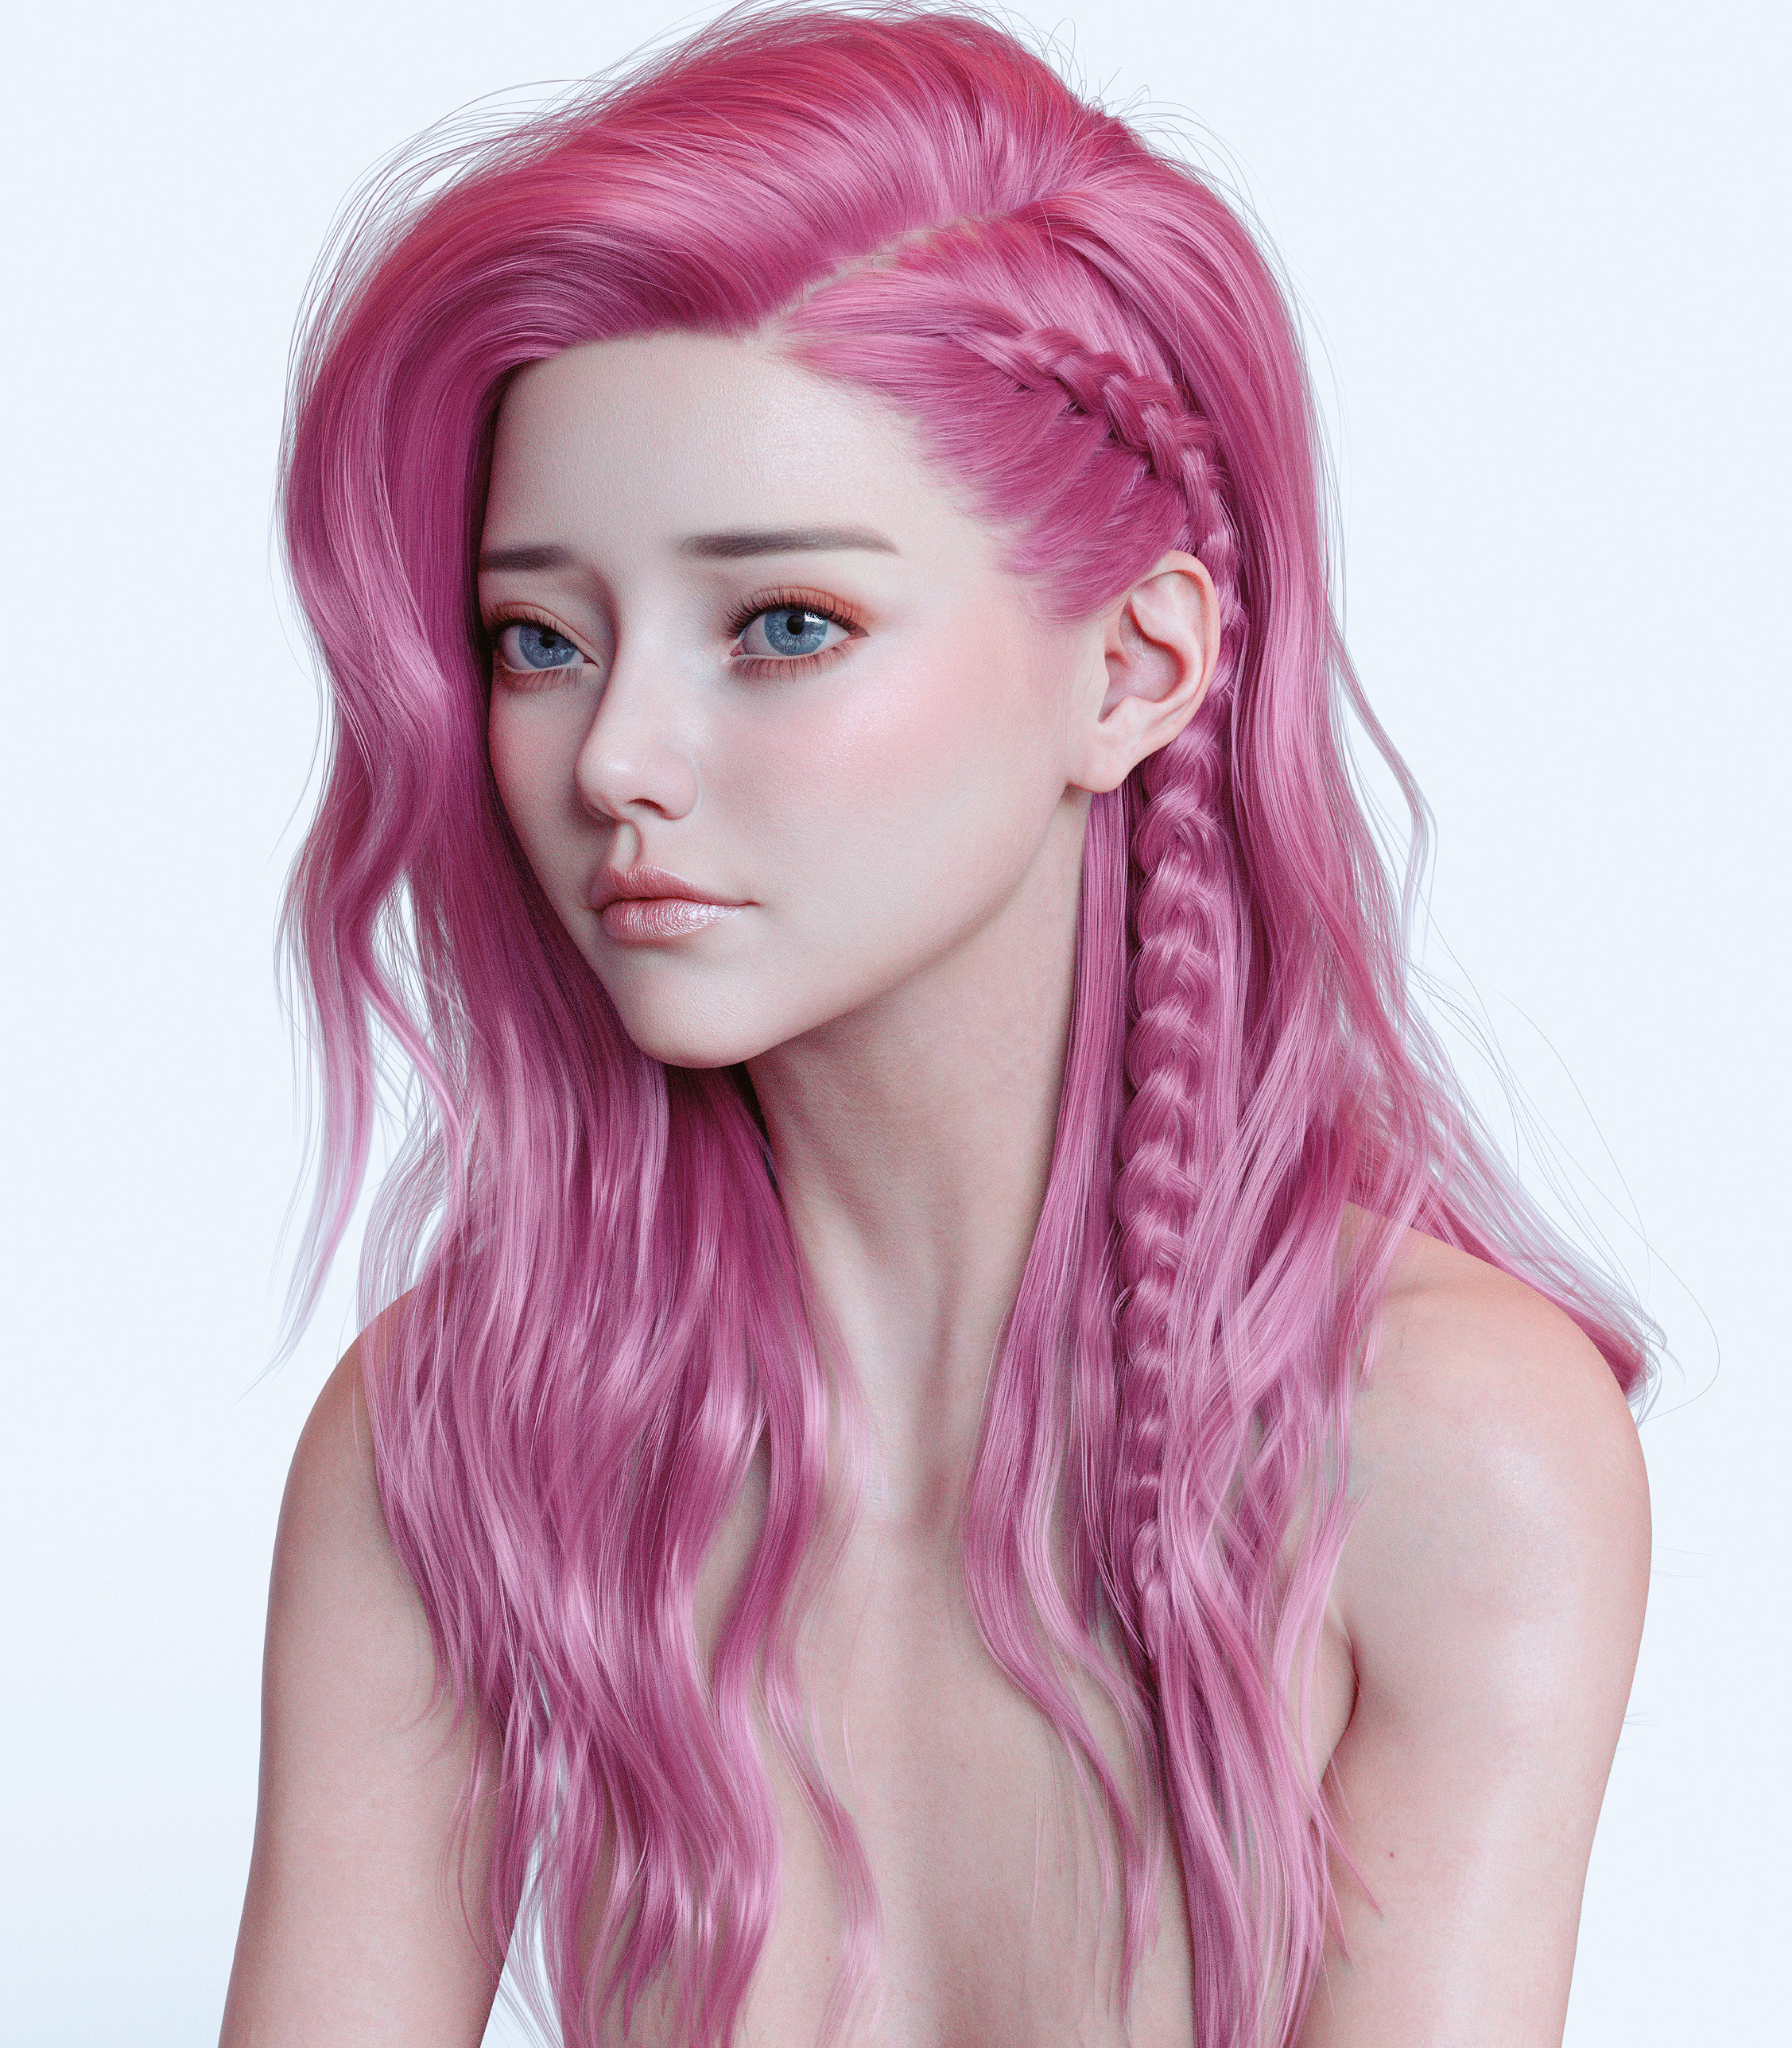 General 2254x2576 pink hair women Chen Wang CGI Seraphine (League of Legends) long hair blue eyes blushing looking away cleavage nude video games League of Legends Downsyndrome